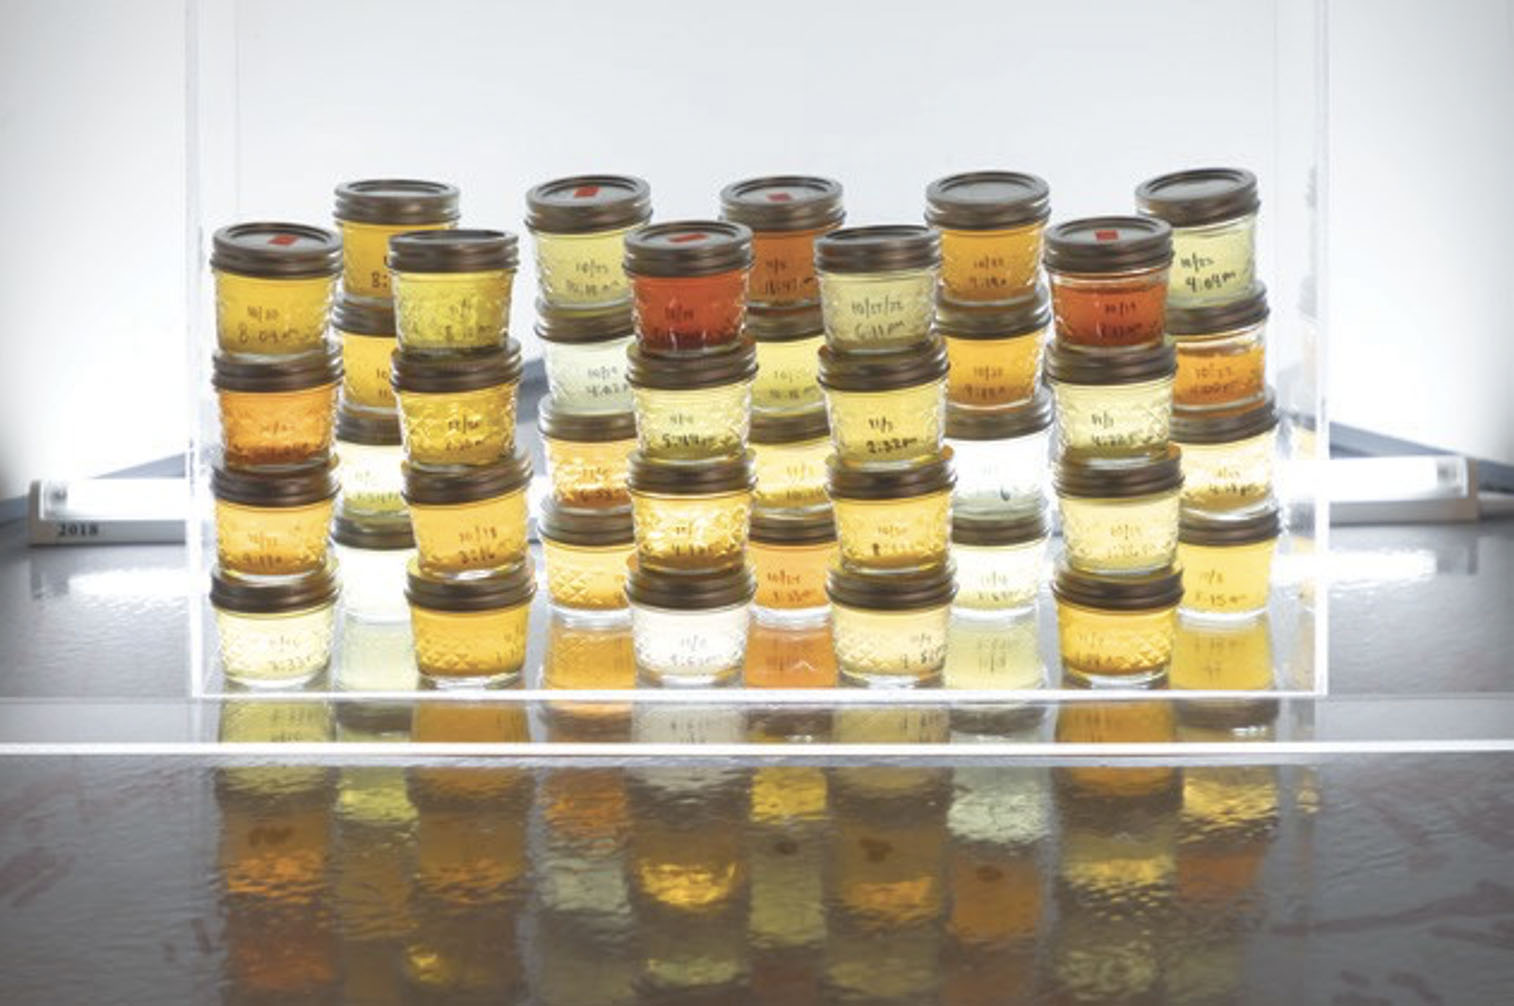 Collection of small mason jars filled with urine.